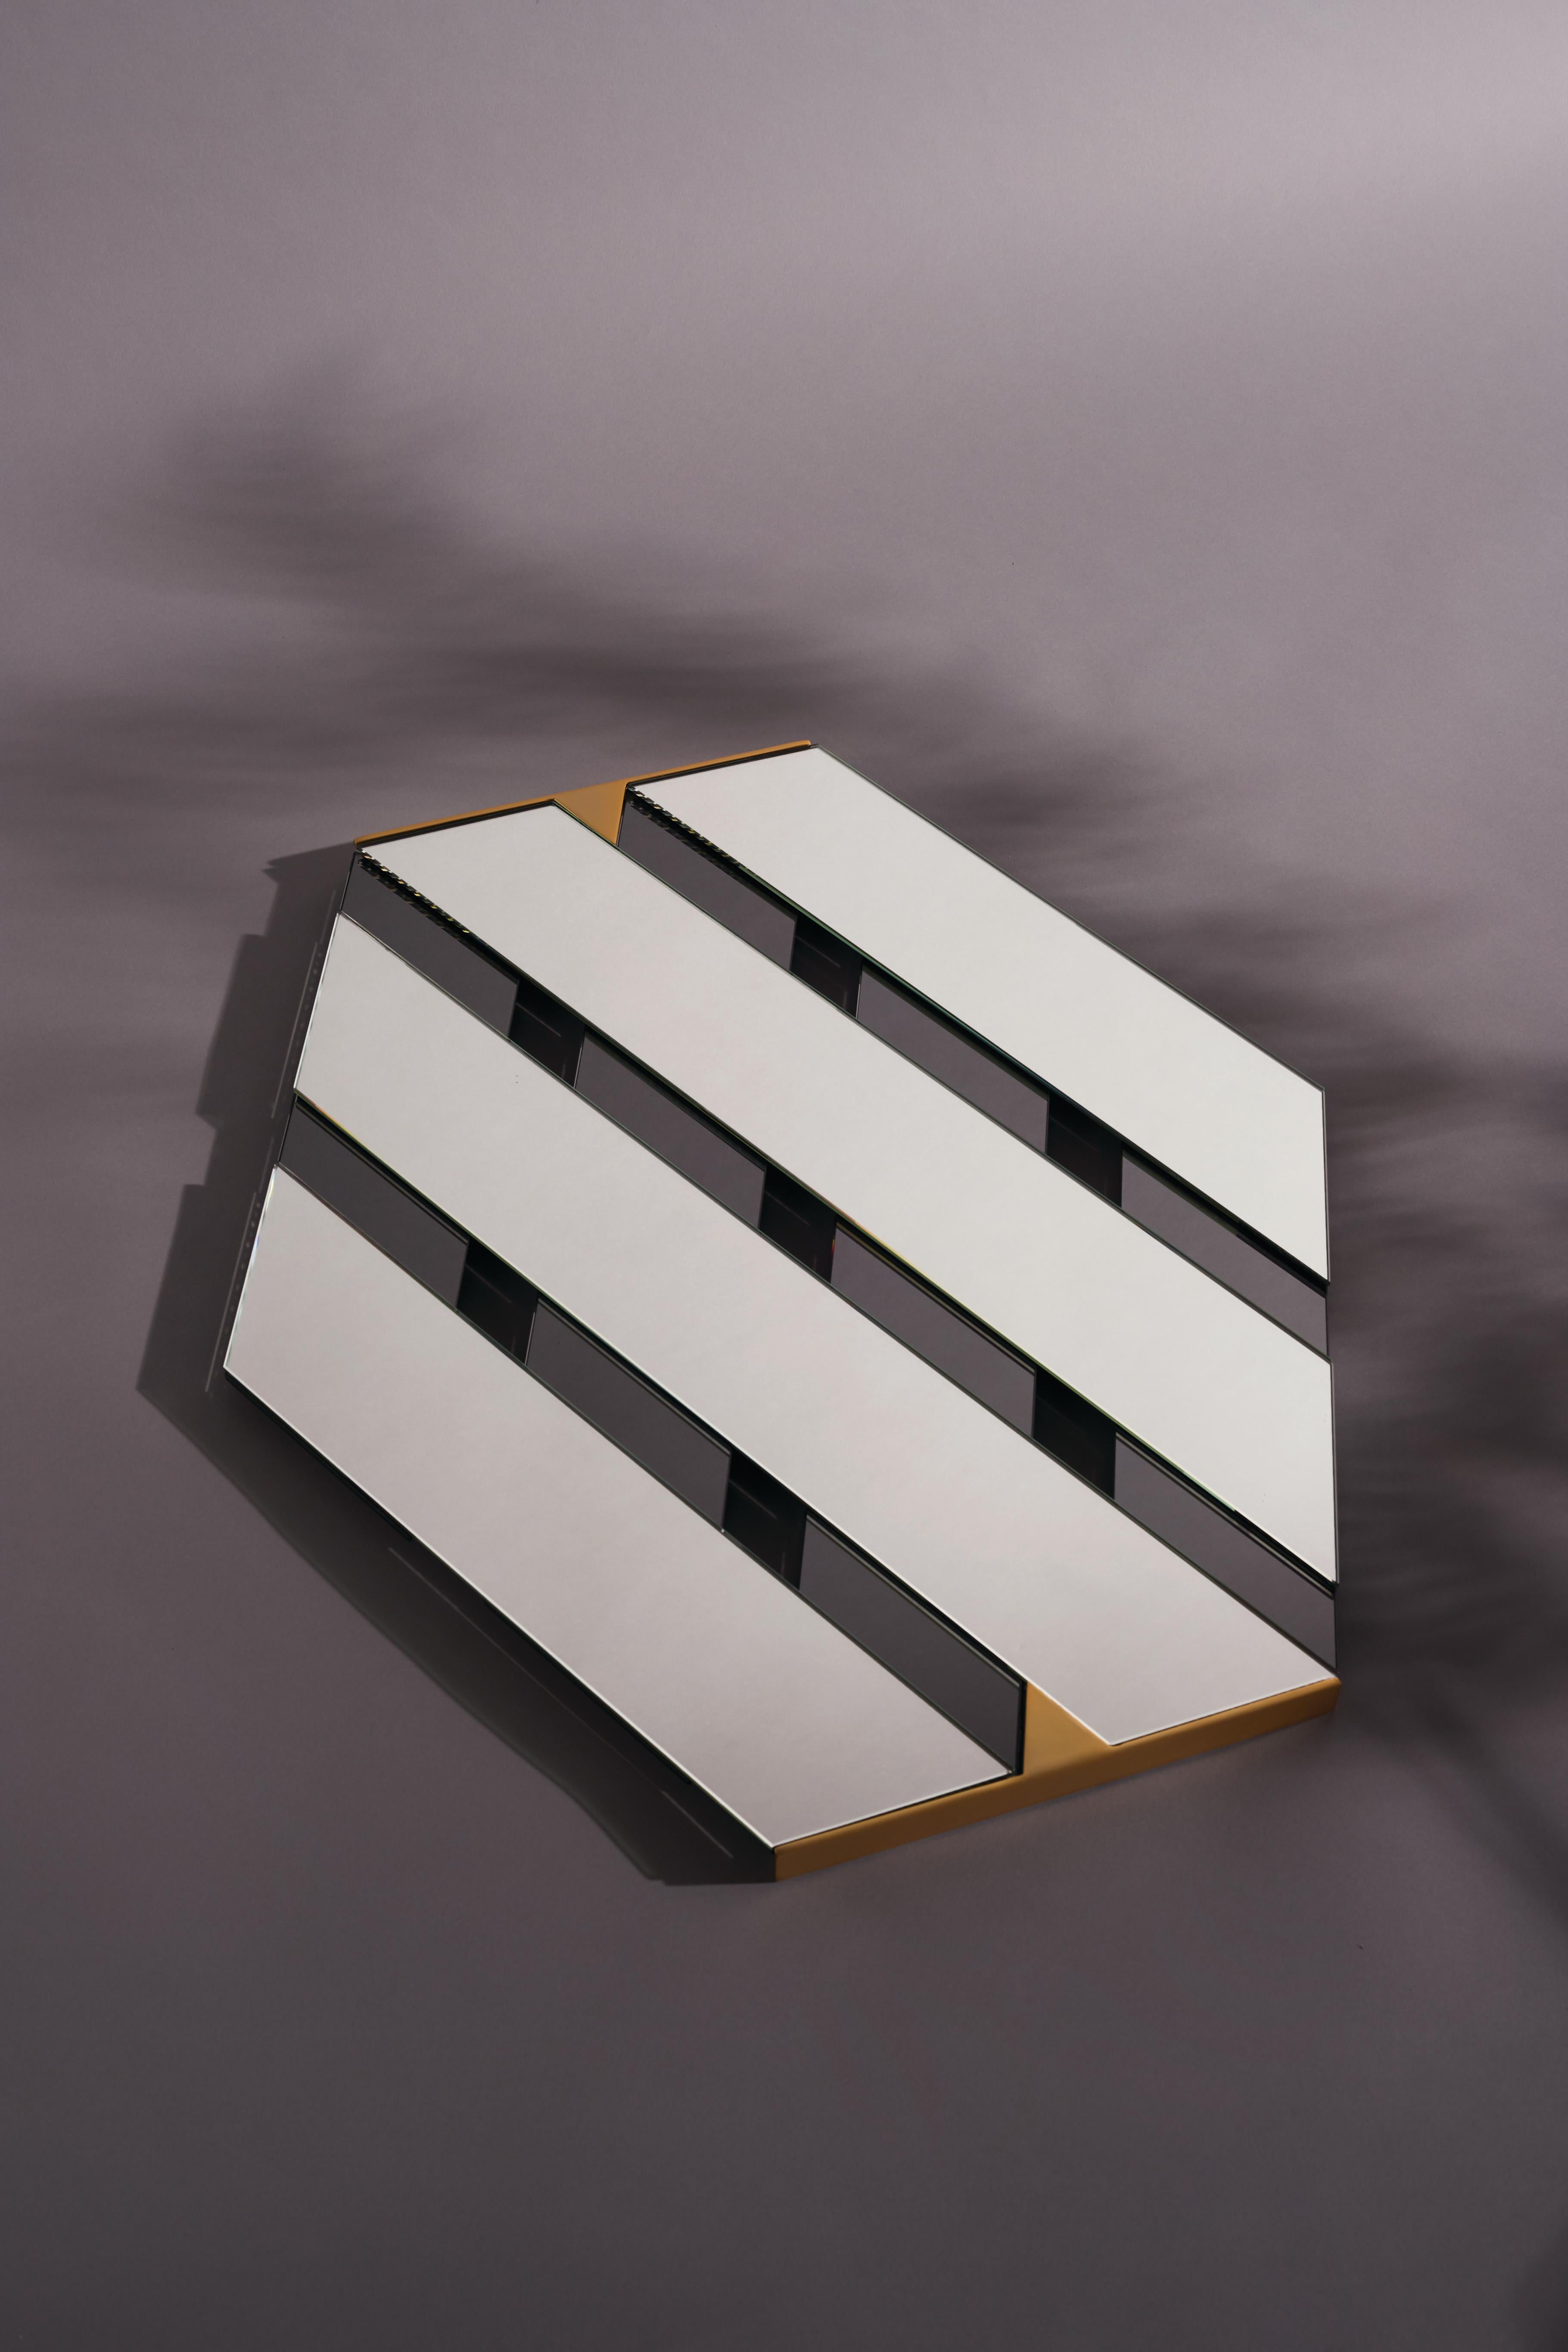 Tresse mirror by Mason Editions
Dimensions: 15 x 15 x 31 cm
Materials: Glass and metal

Diagonal bands of reflecting surface, which overlap in an elegant optical effect with as many bands of colored mirror: this hexagonal mirror recalls the most